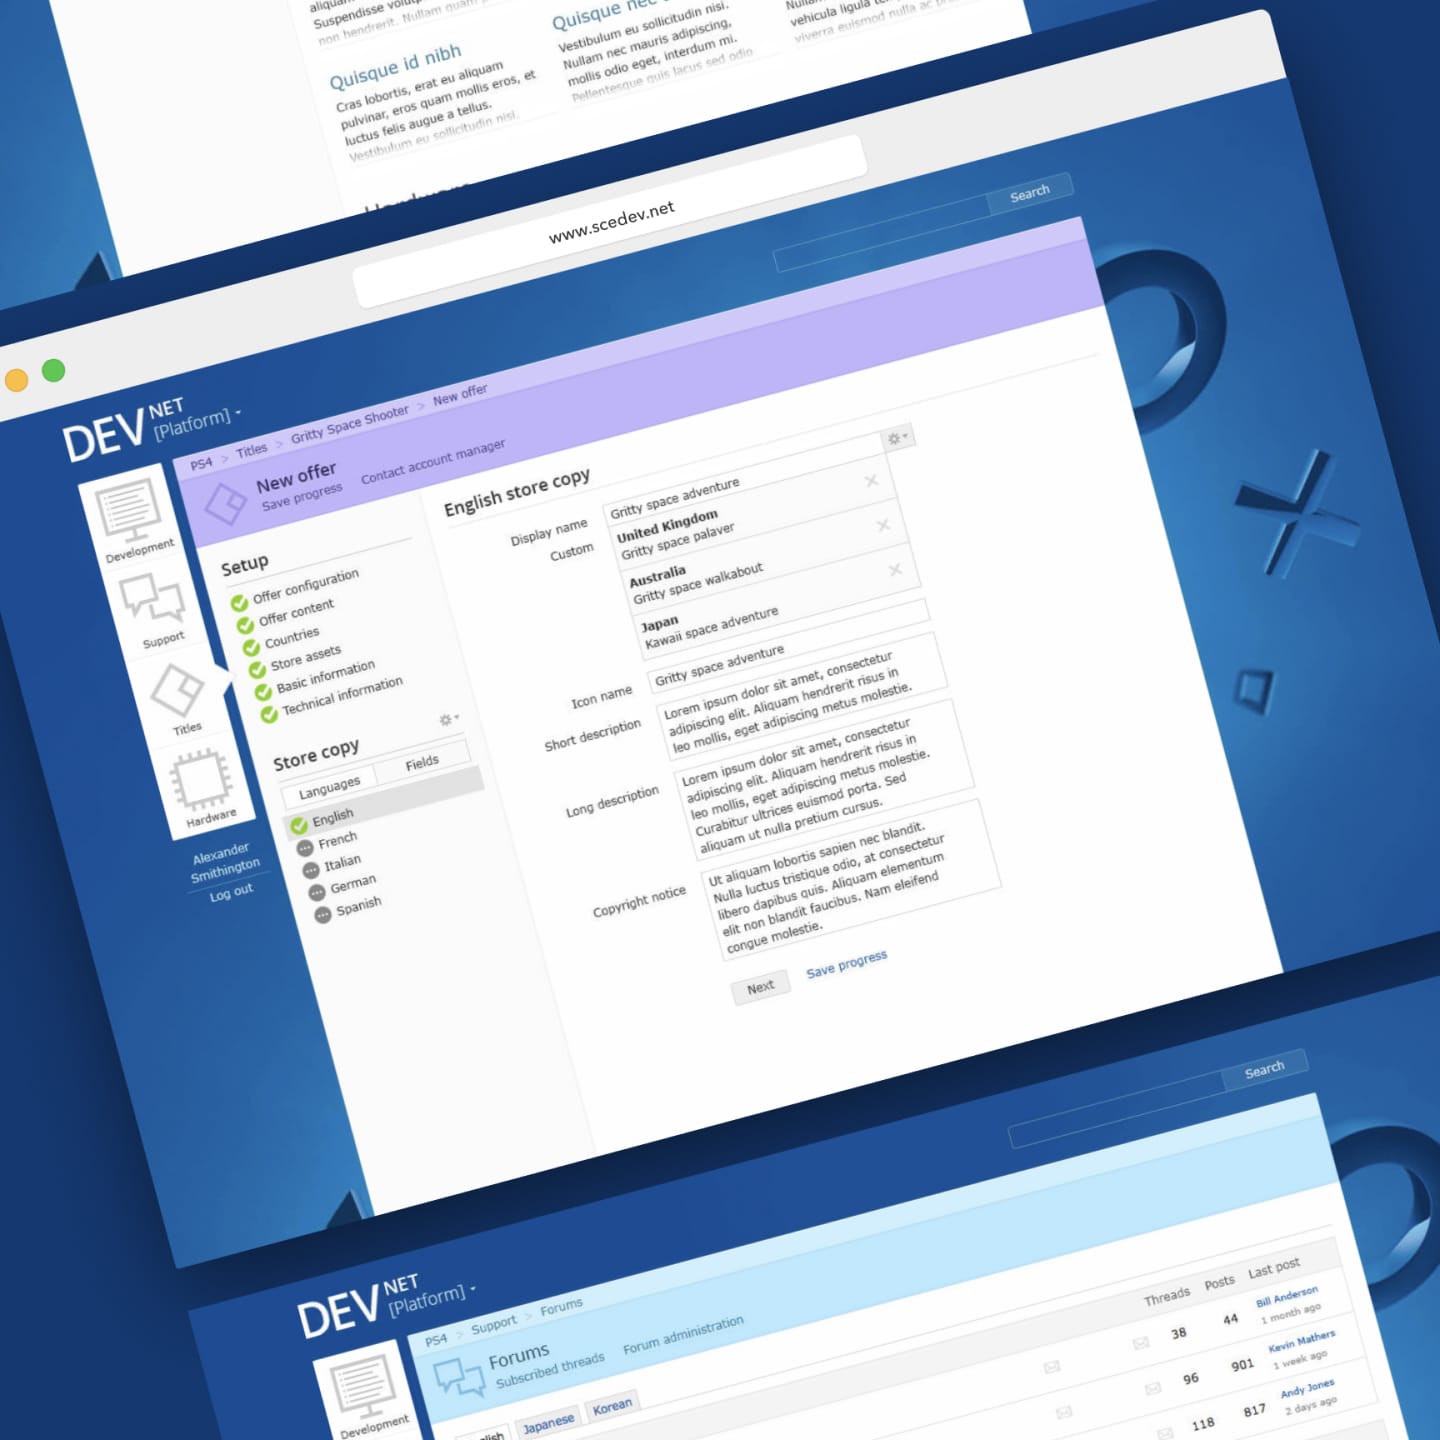 A collection of screens from the redesigned verion of DevNet